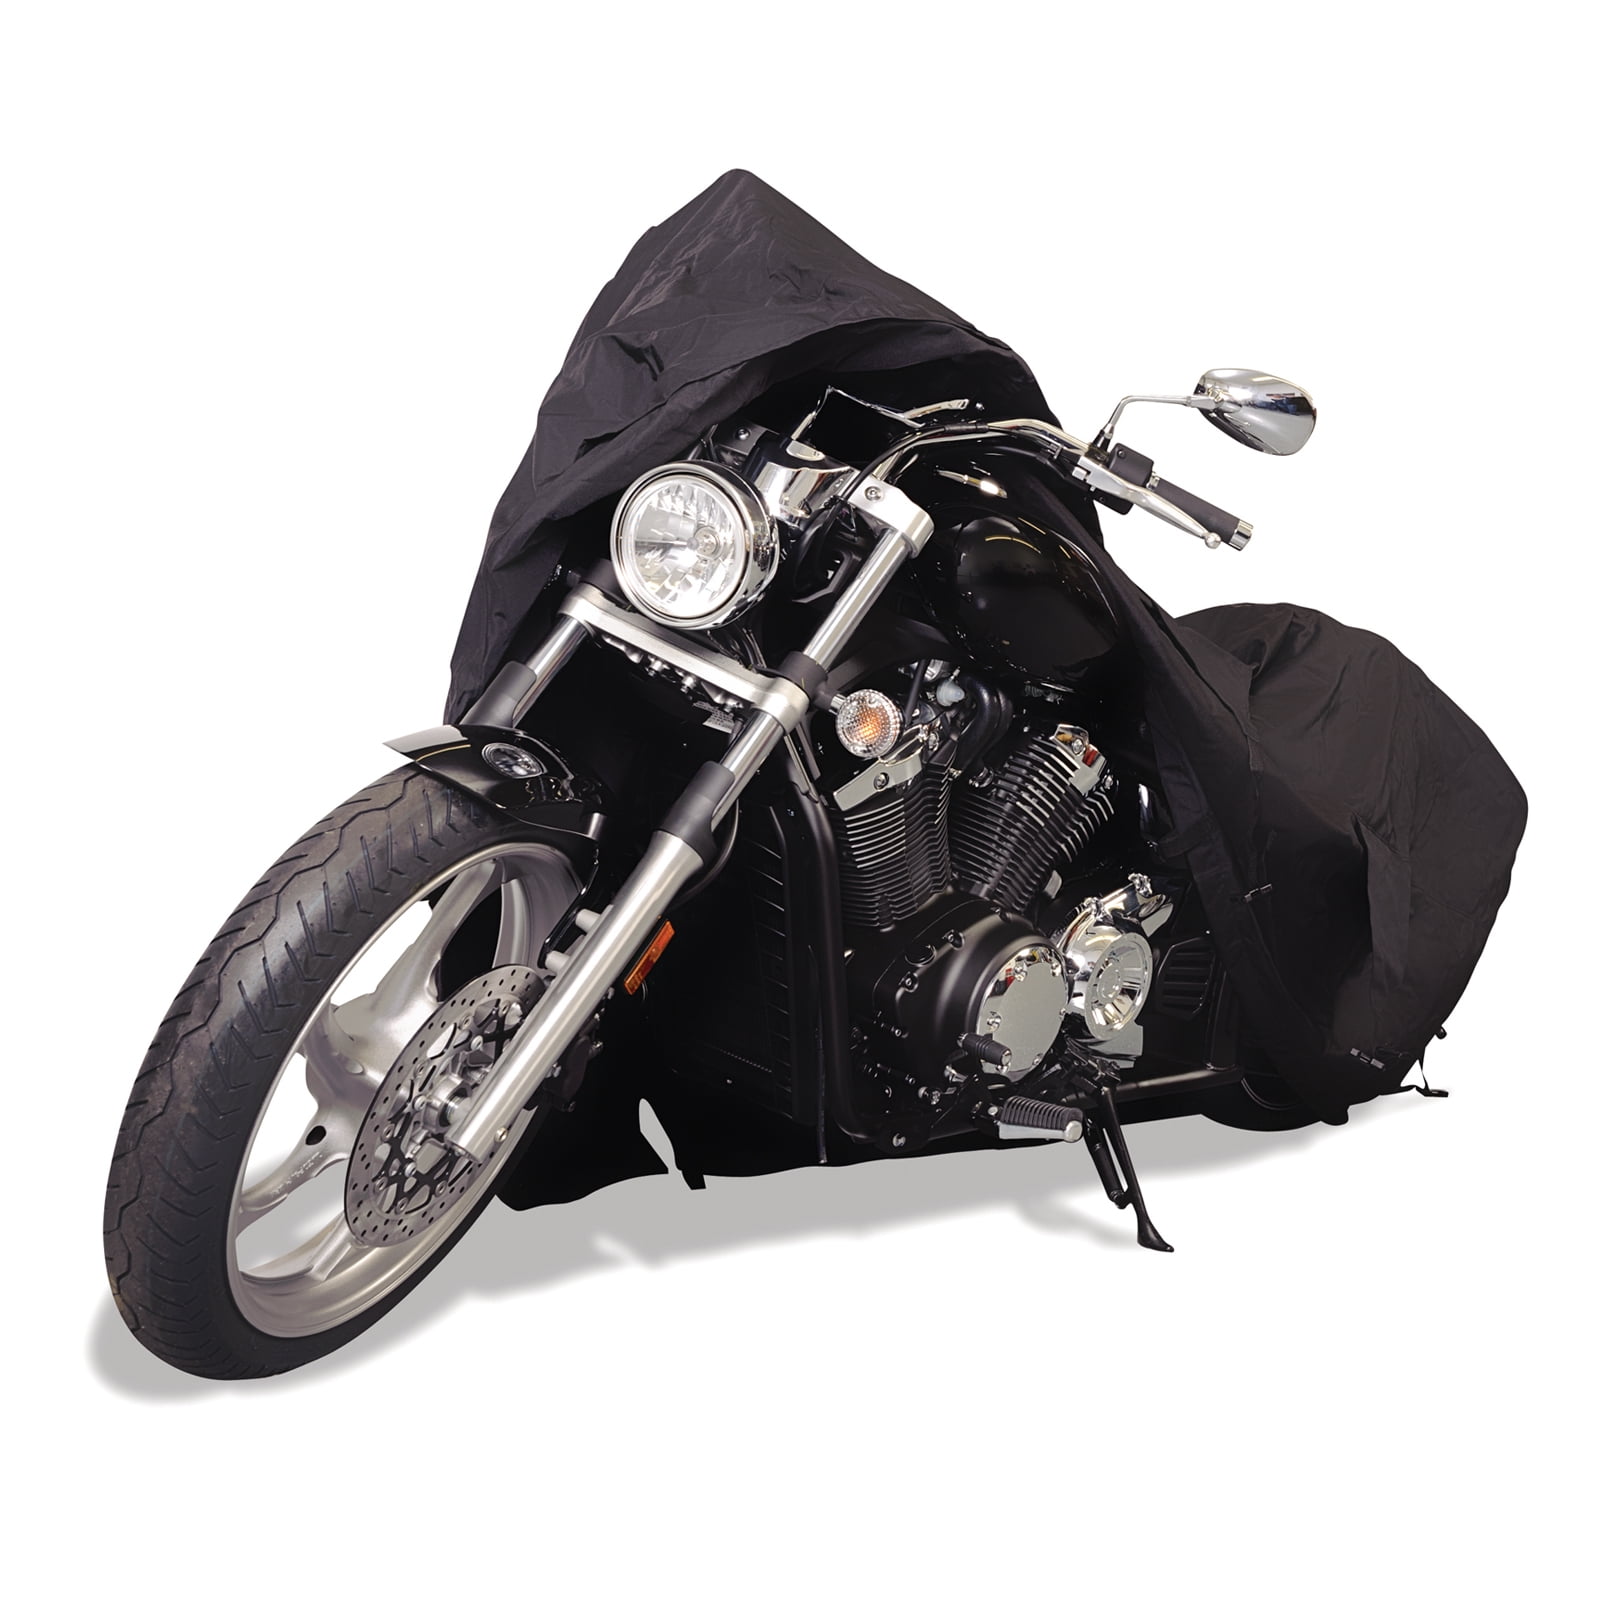 Budge Industries Extreme Duty Waterproof Motorcycle Cover